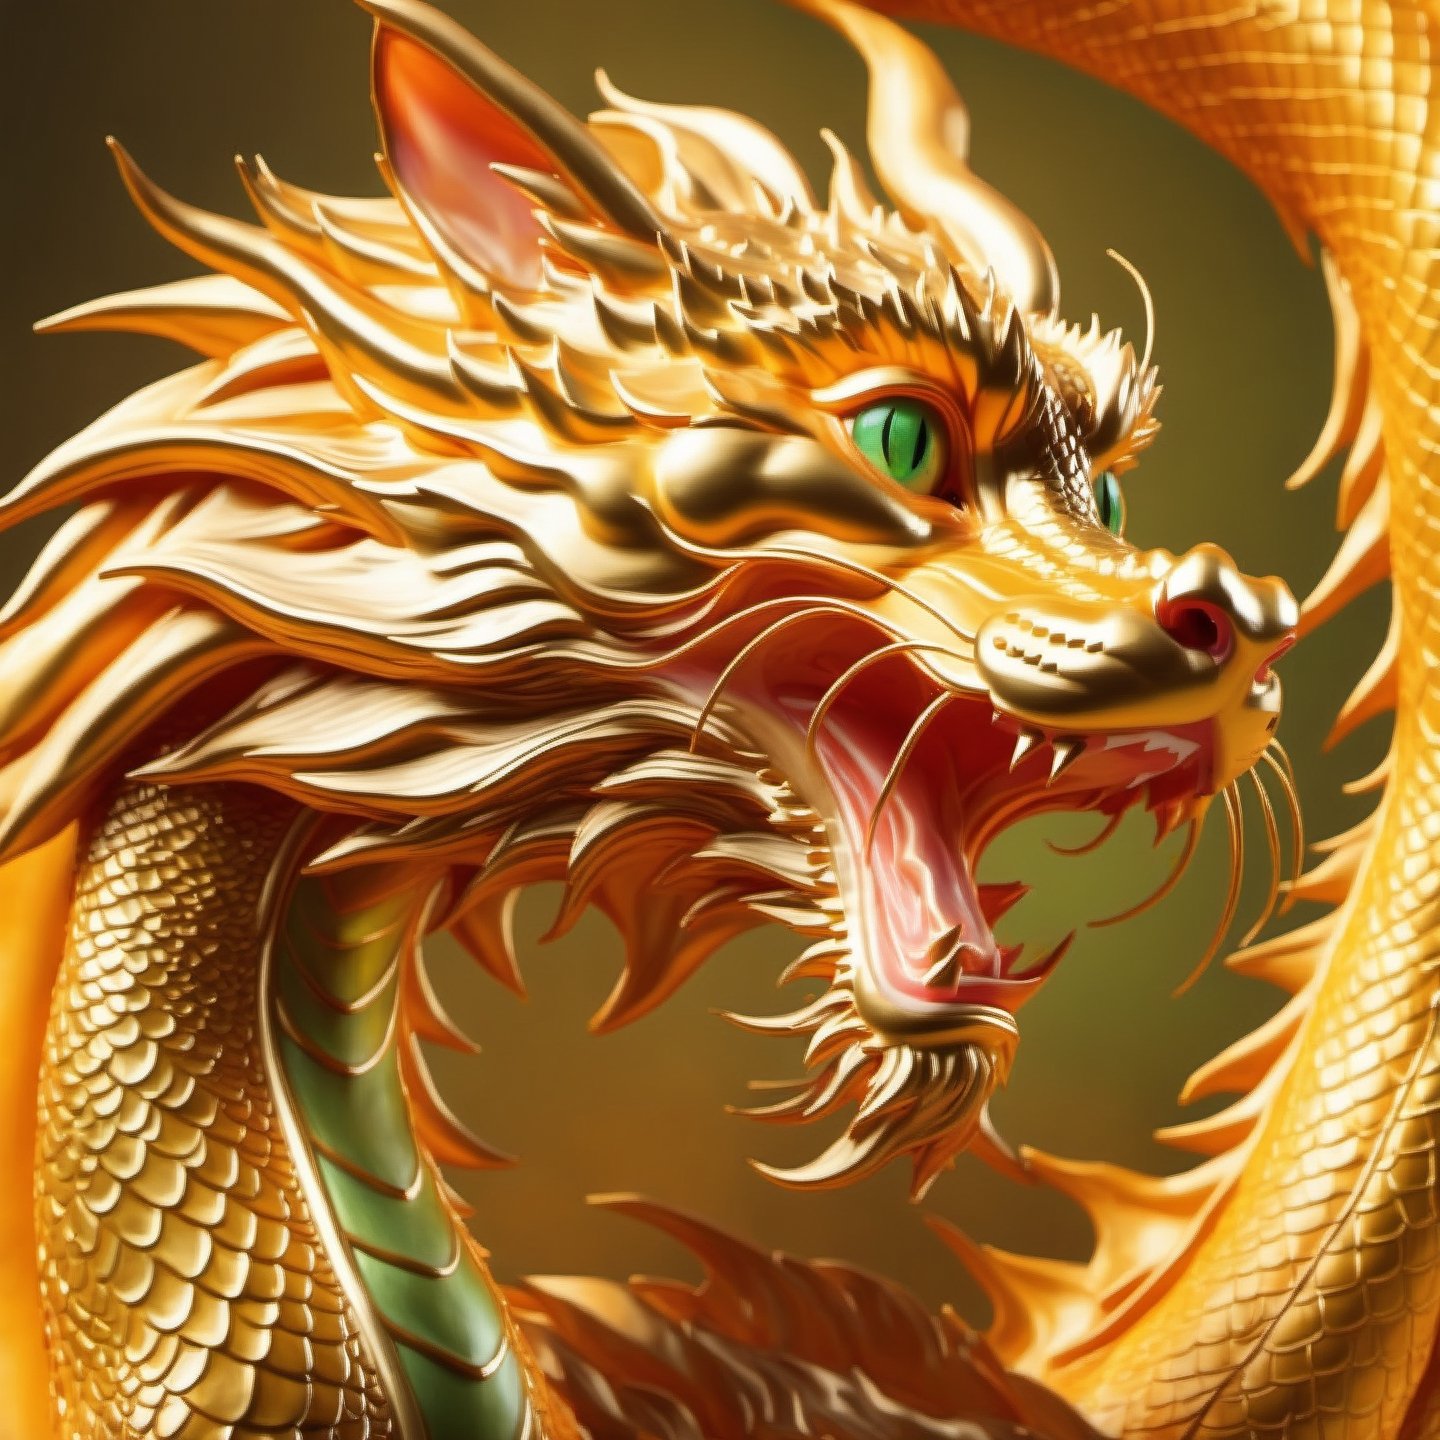 orange cat with green eyes, wearing a suit and tie, BREAK, dragon looped in background,golden dragon